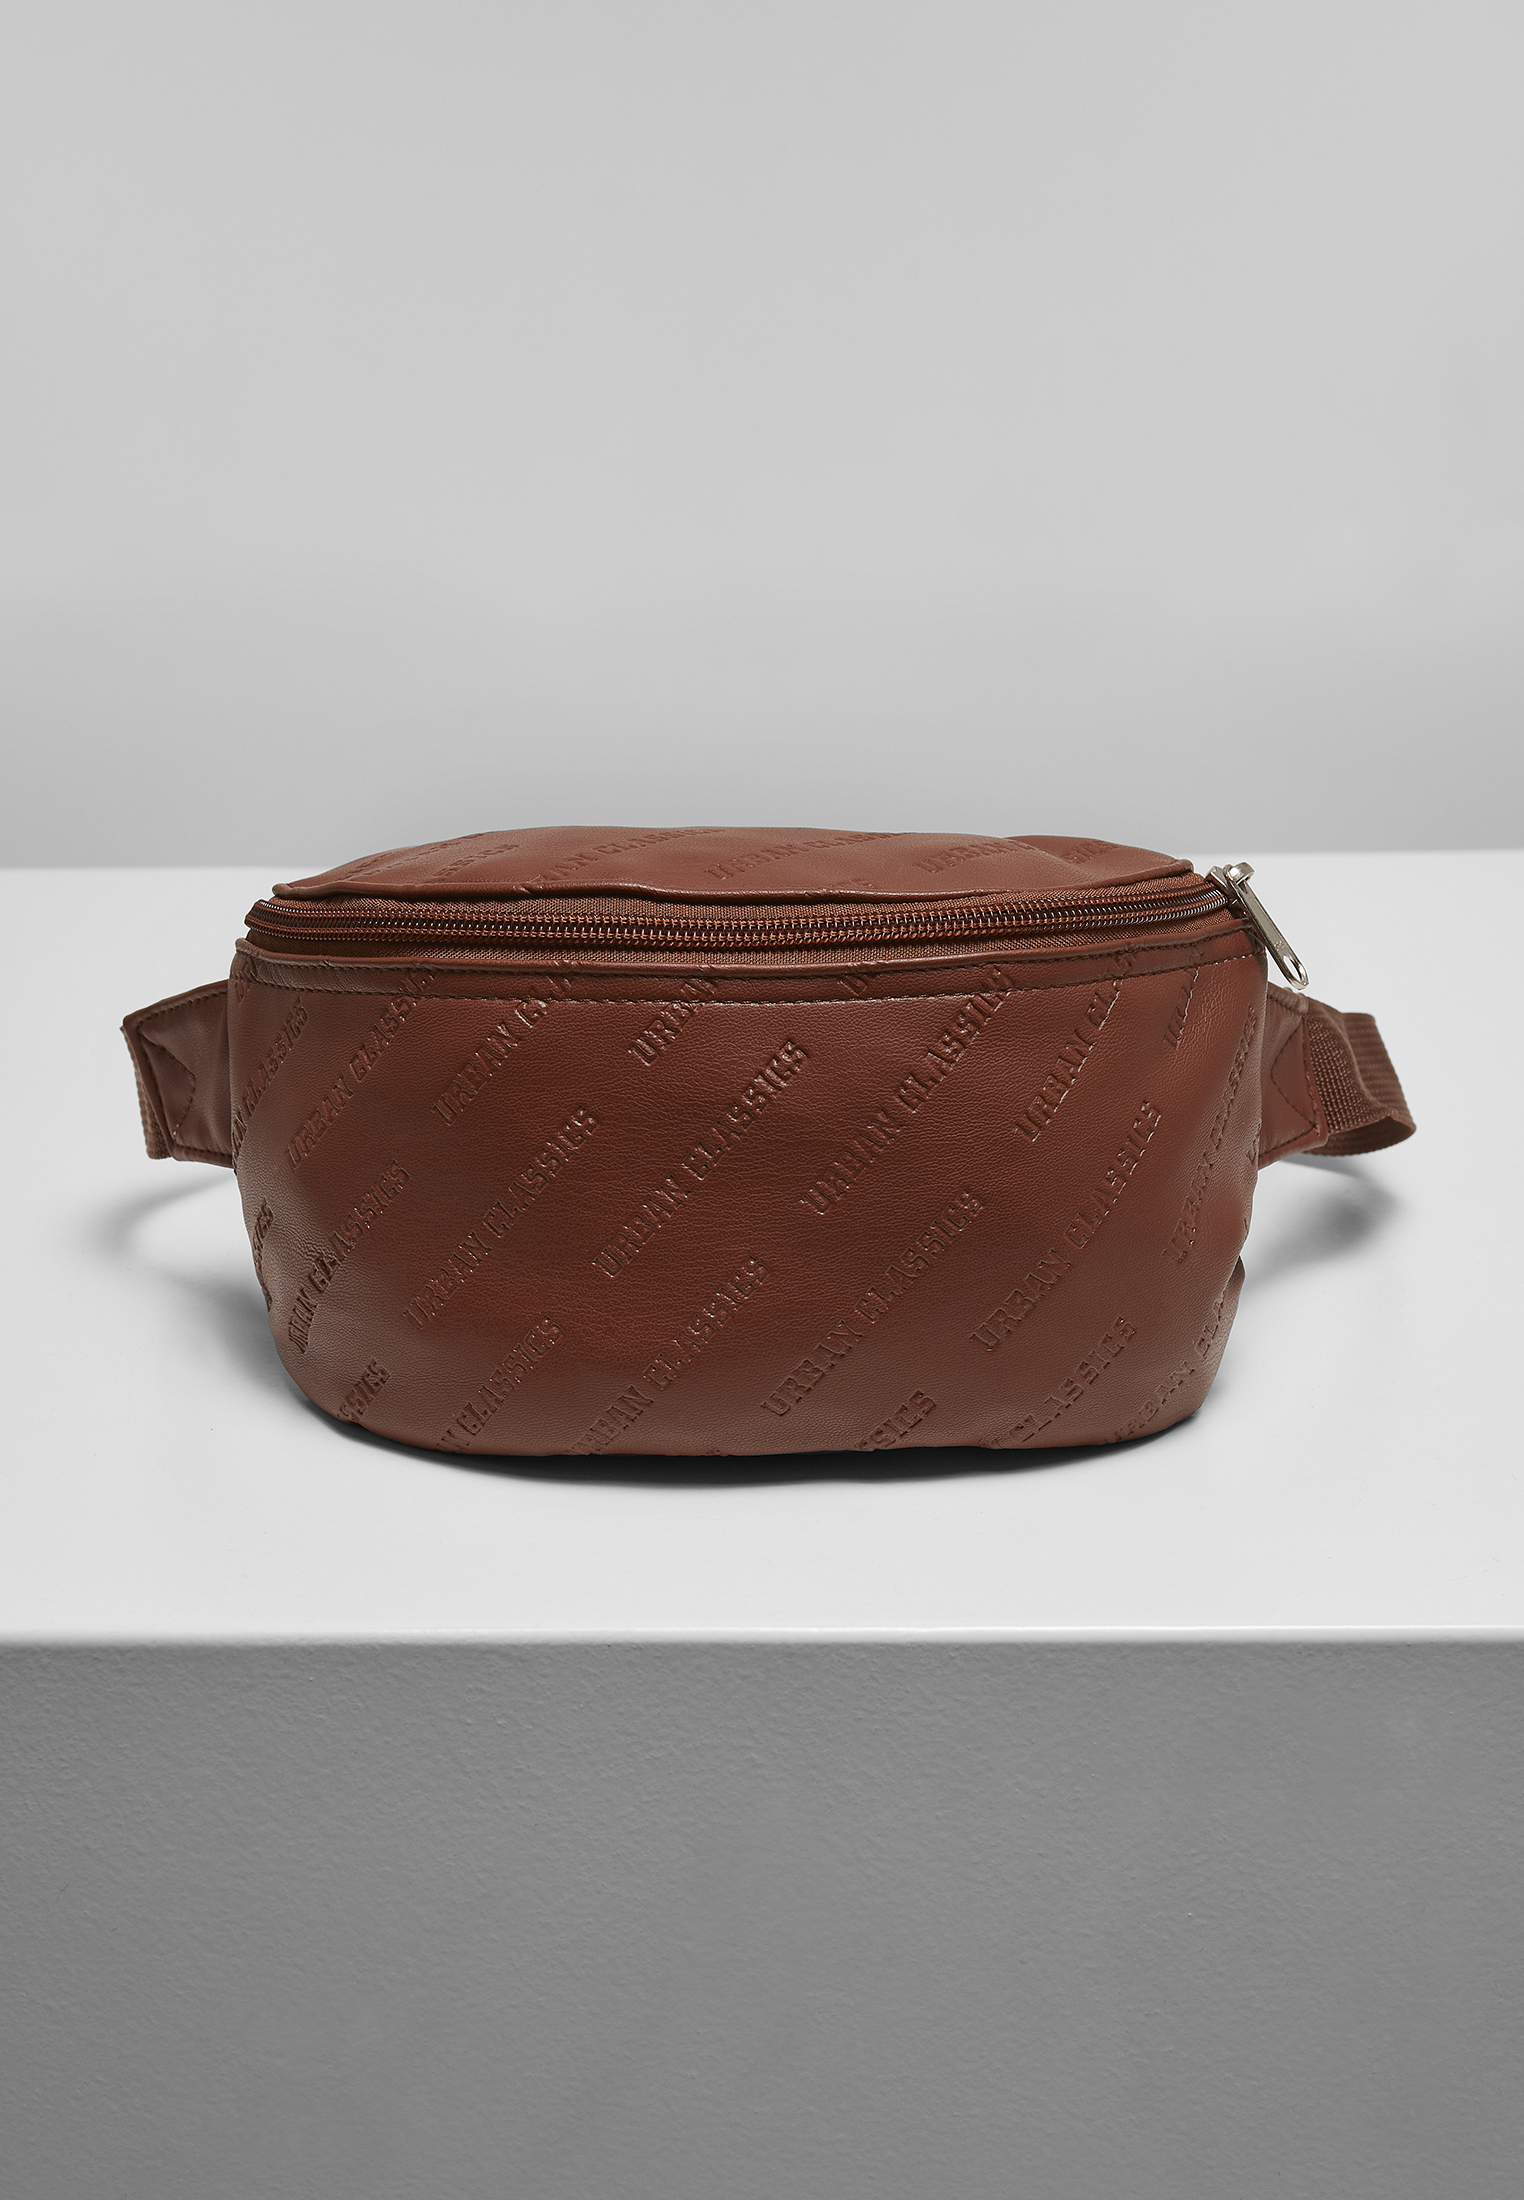 Hip Bag Synthetic Leather Brown